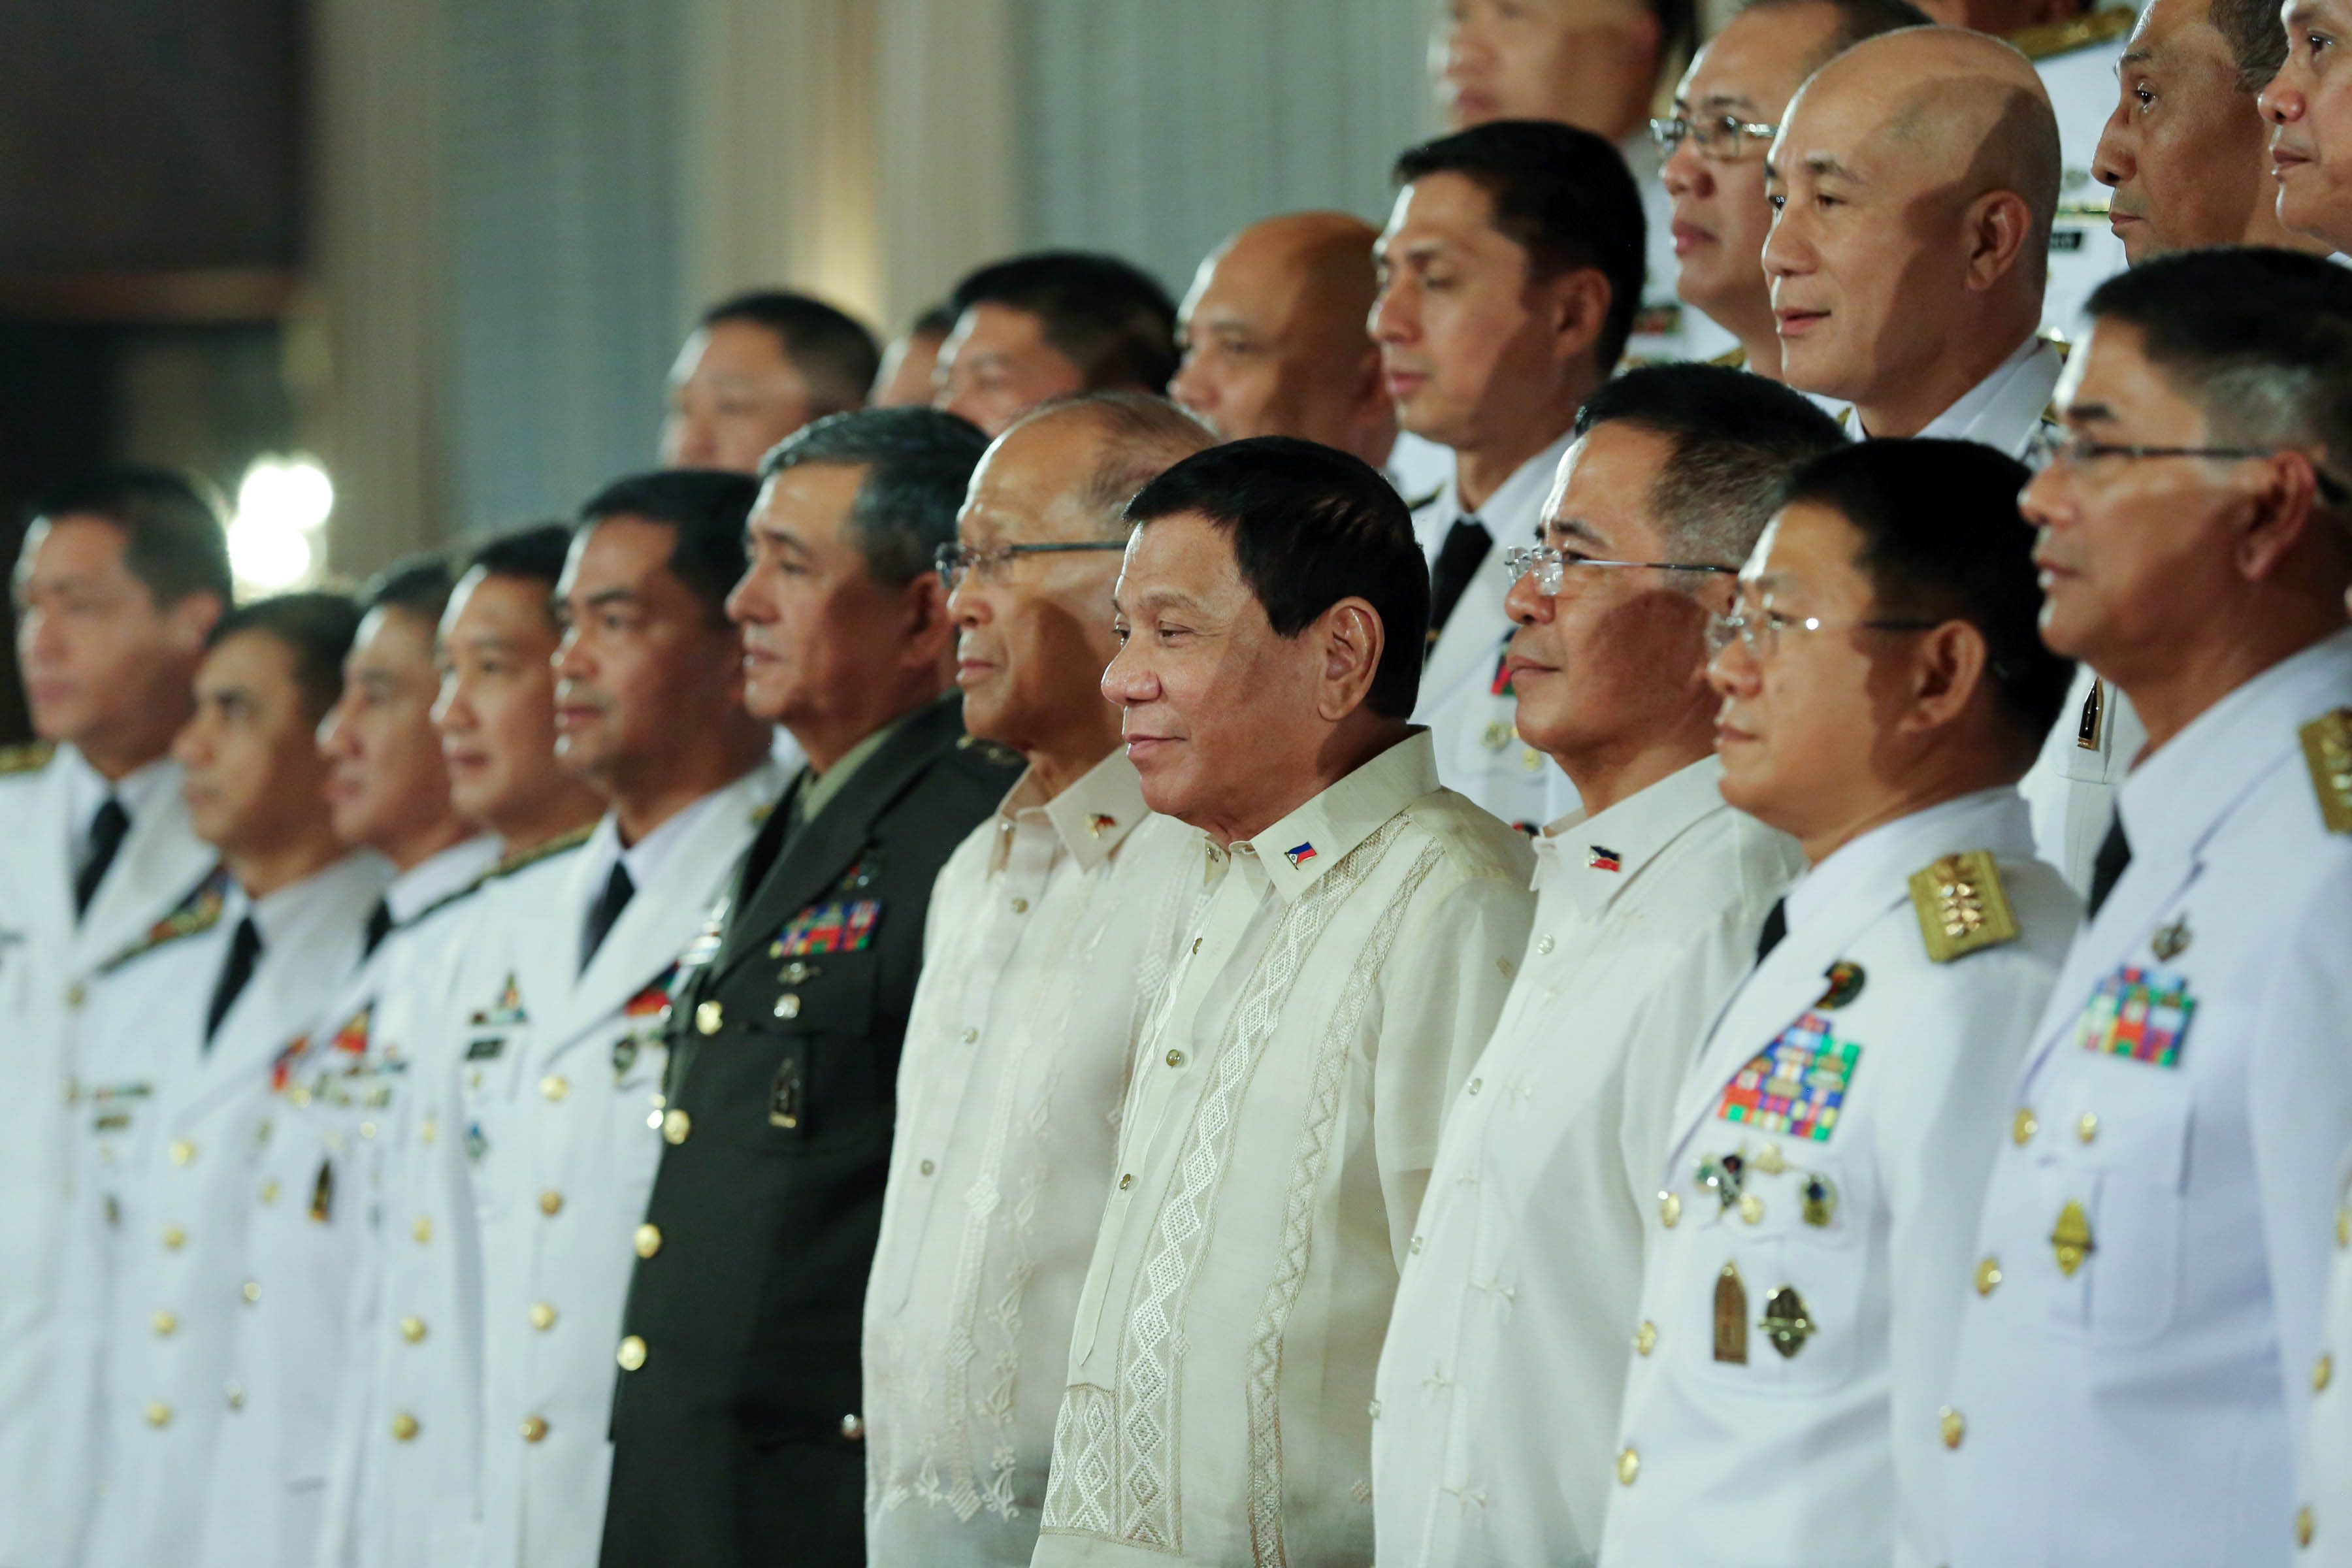 INTO THE FOLD. President Rodrigo Duterte poses for a photo with newly-appointed officers of the Armed Forces of the Philippines on January 31, 2017. File photo by Richard Madelo/Presidential Photo 